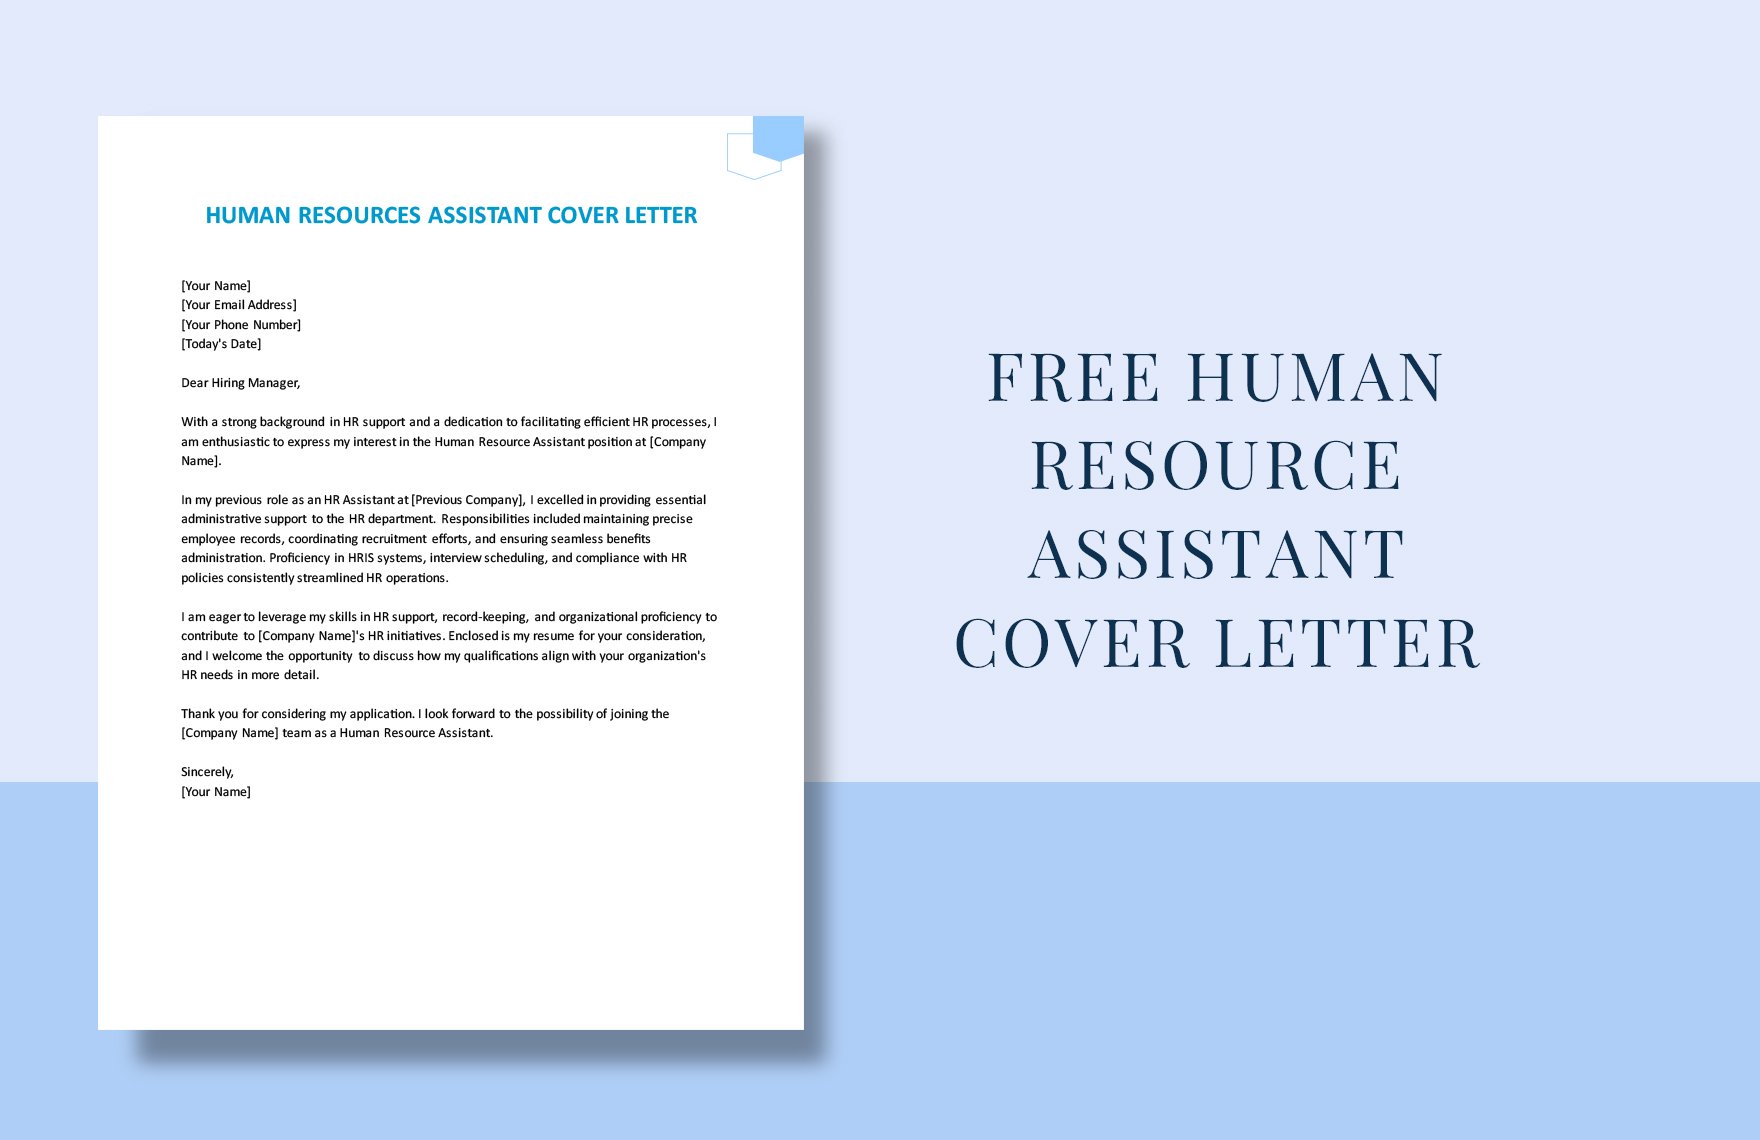 Human Resource Assistant Cover Letter in Word, Google Docs, PDF